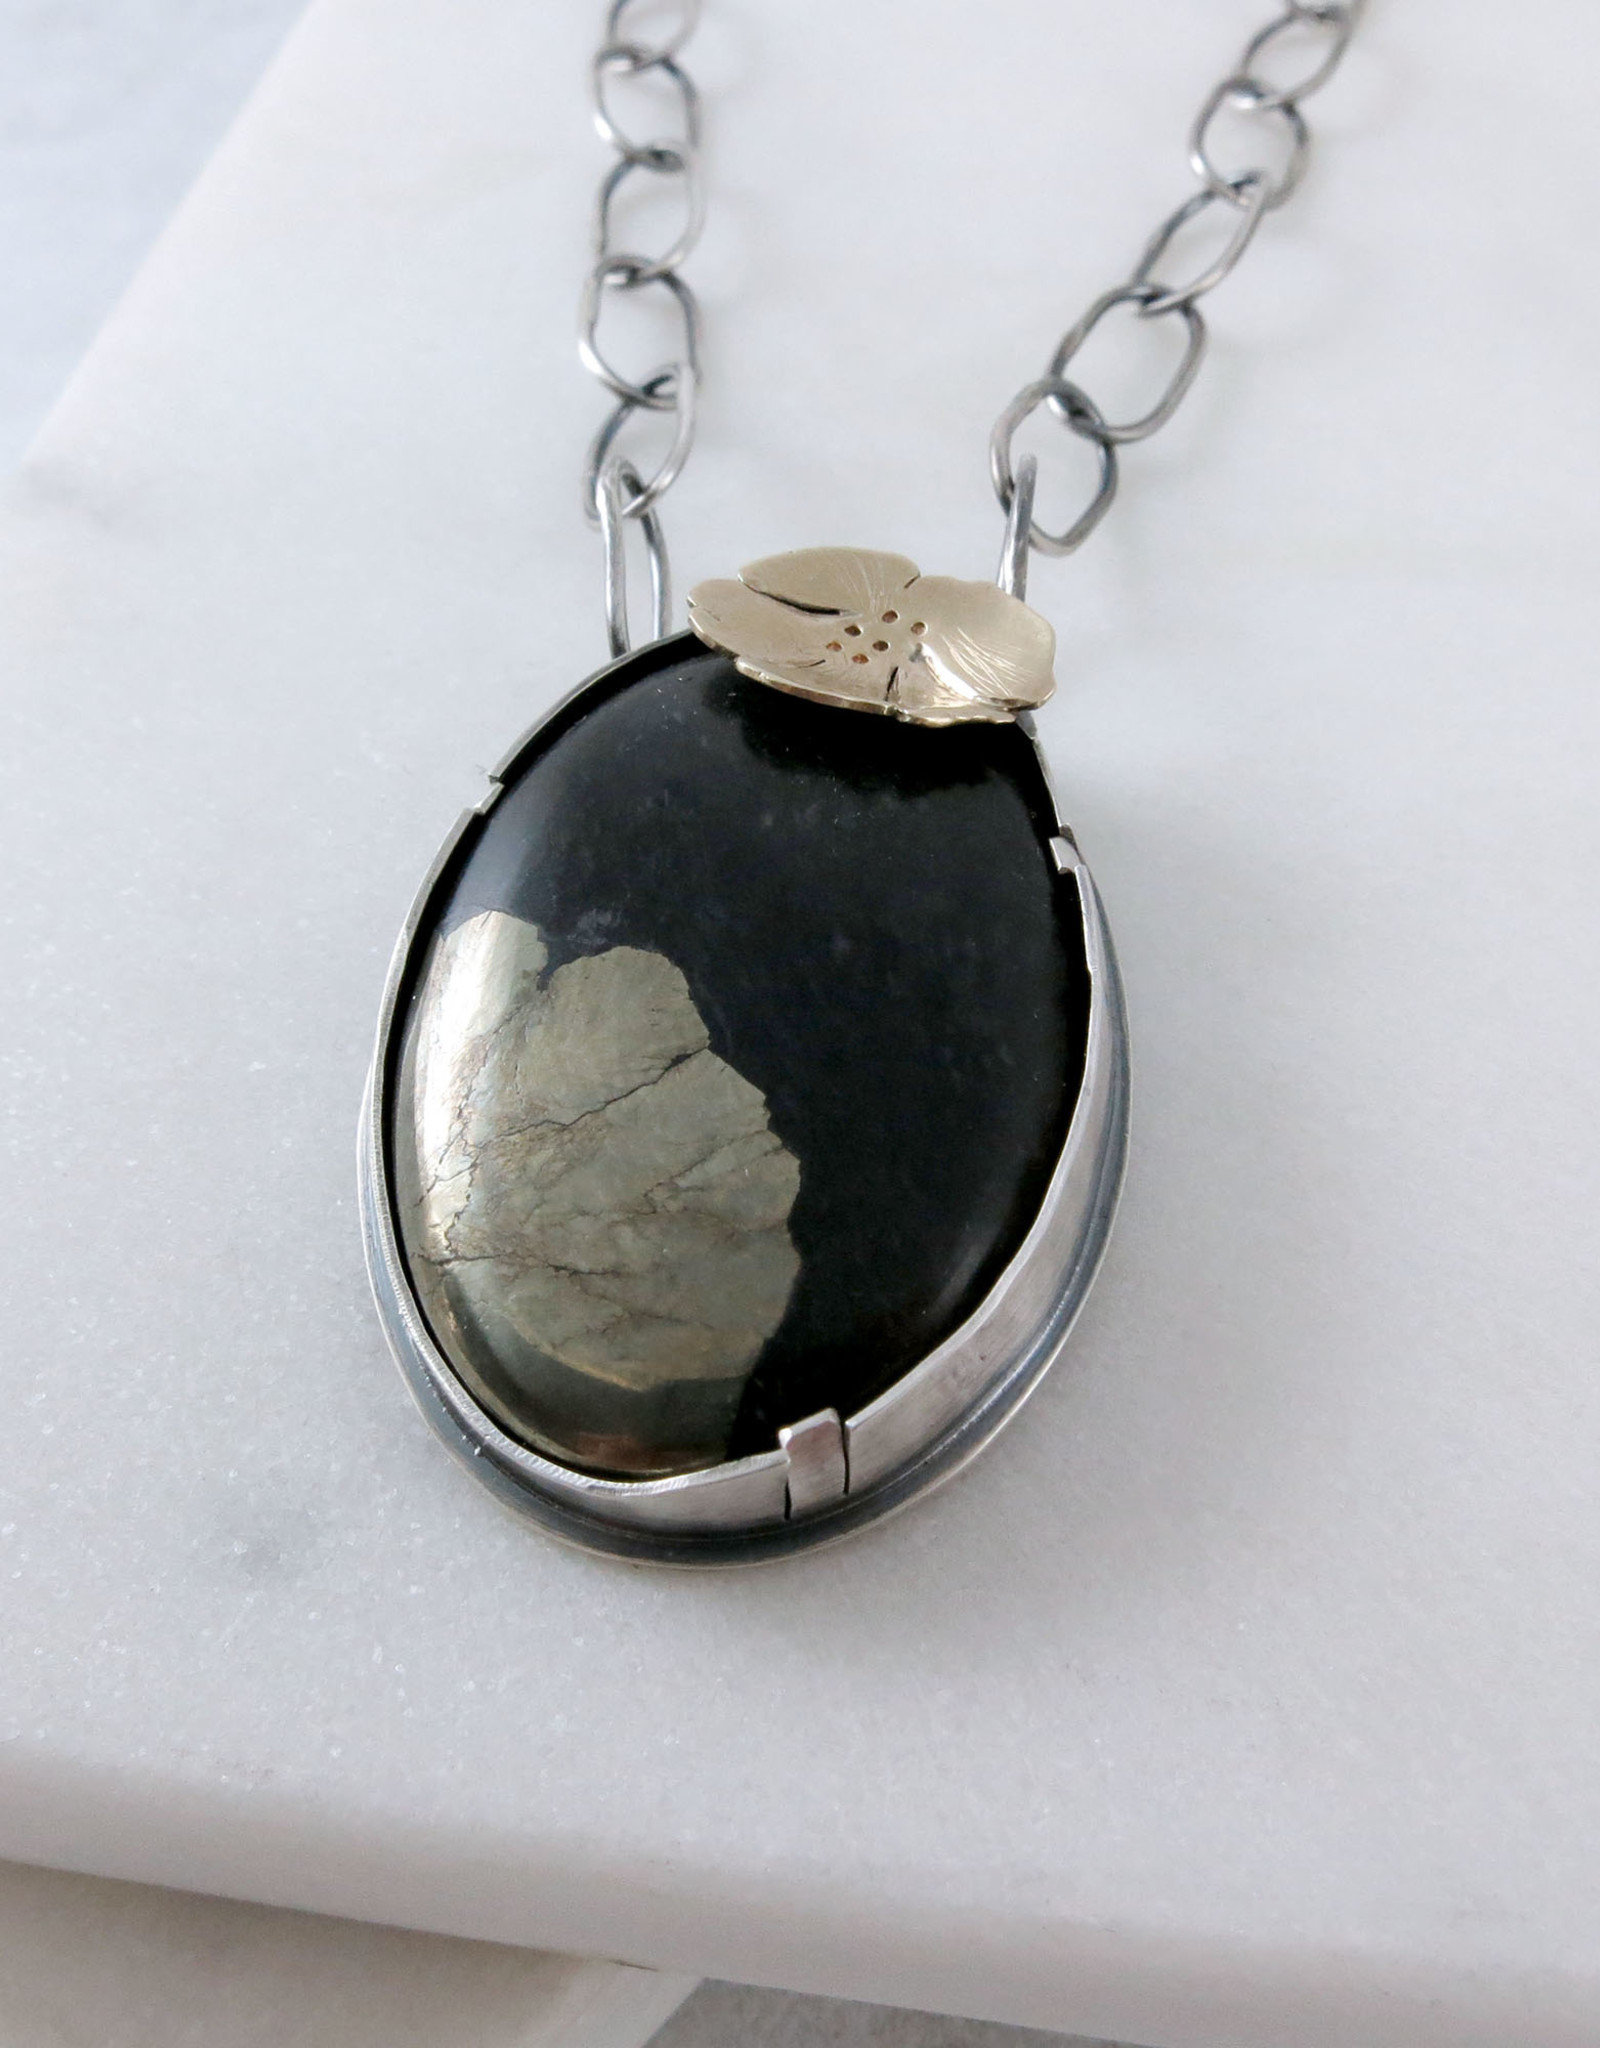 Catherine Chandler Moonflower Necklace with Chalcopyrite, Sterling Silver, and Gold 24" Long - CCJ